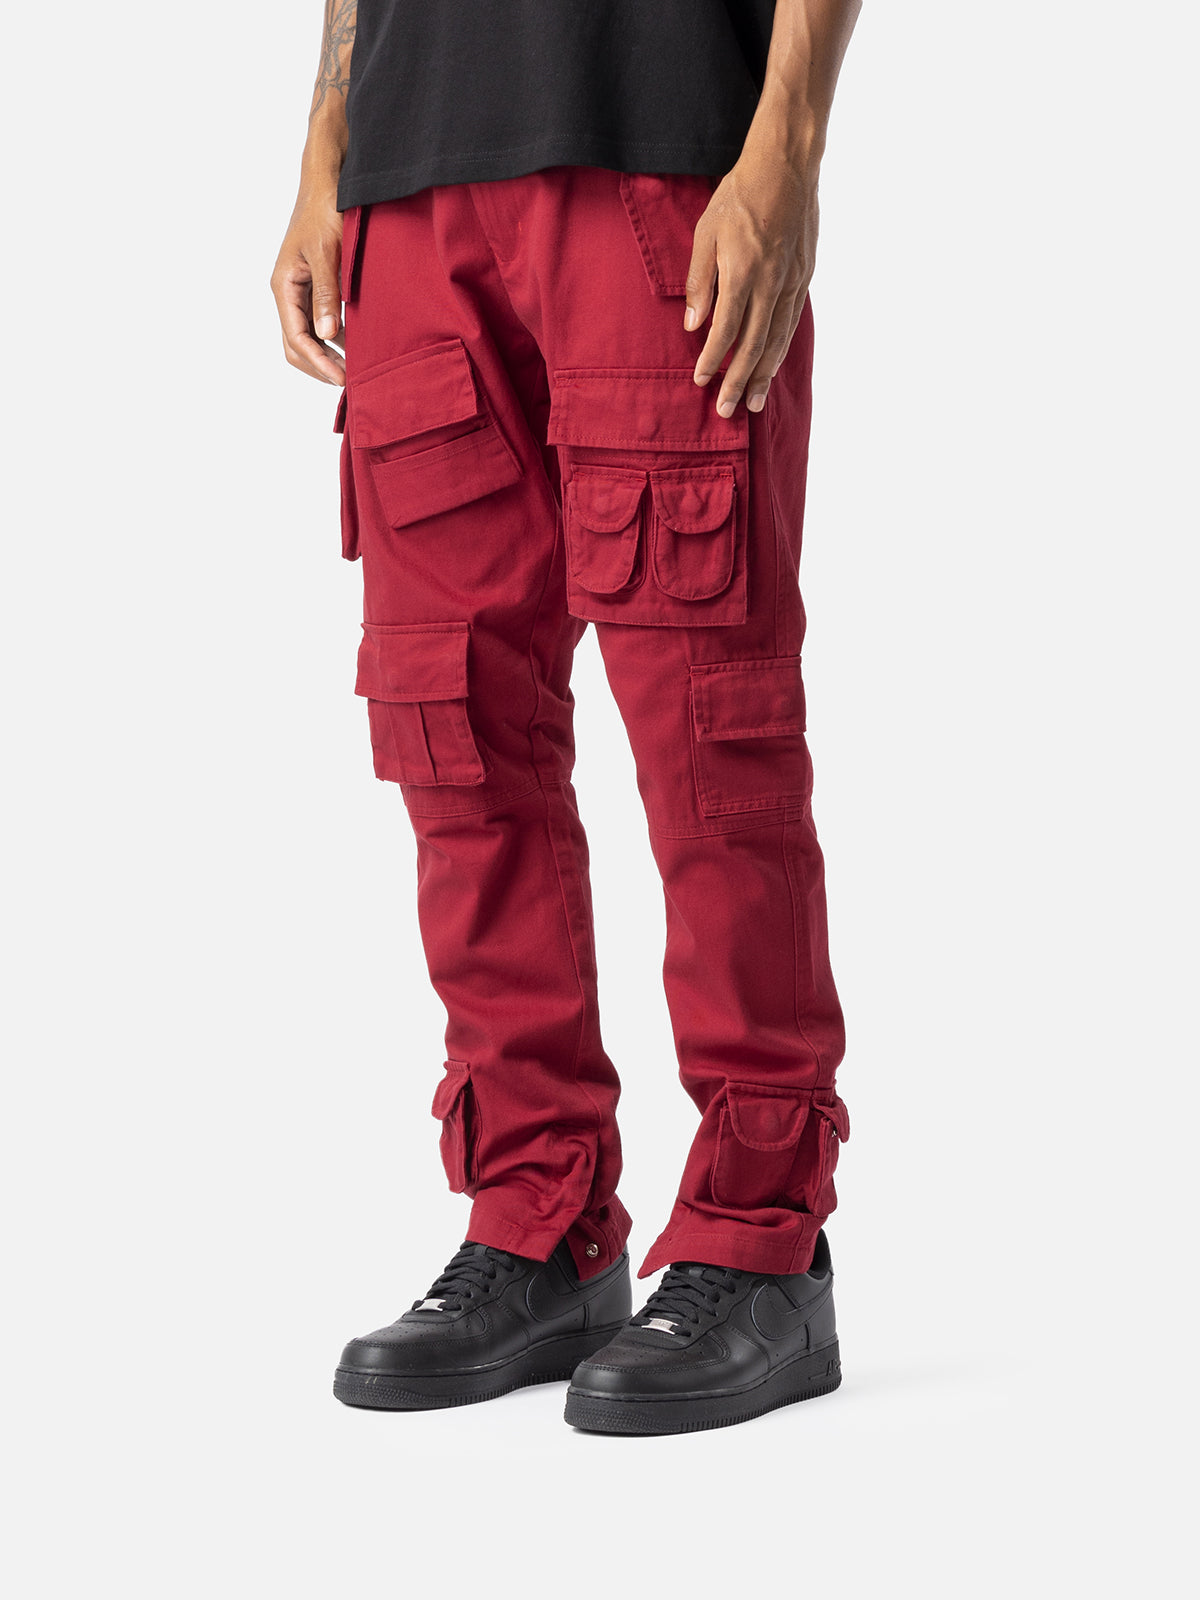 MIXCUBIC 2017 Autumn Korean Style Wine Red Cotton Overalls For Men Casual  Loose Multi Pocket Red Cargo Pants Mens Sizes 28 40 From Paluo, $28.17 |  DHgate.Com